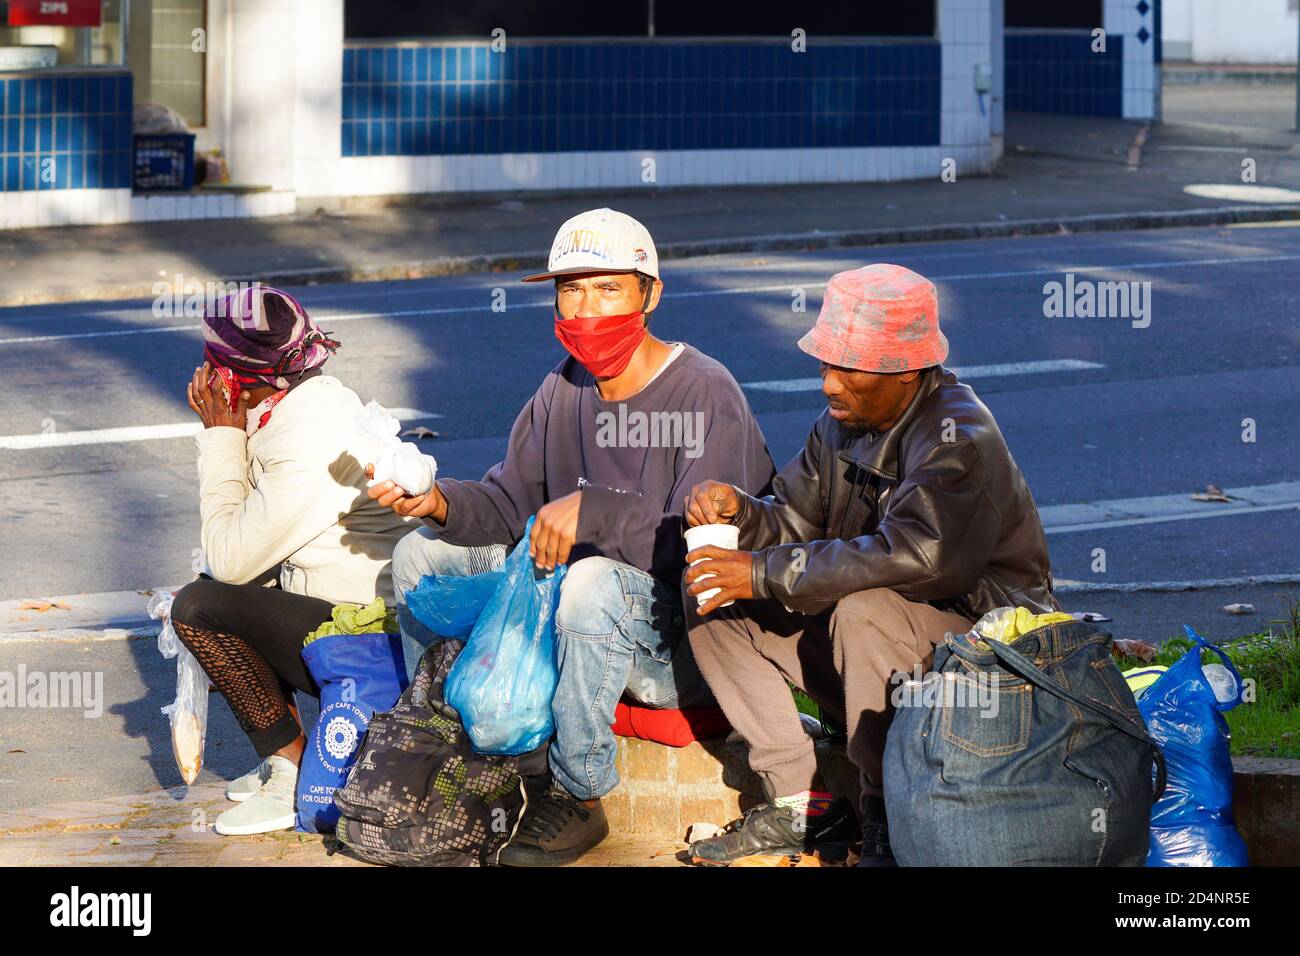 homeless and destitute people sitting in a street with a mask on during lockdown in Cape Town, South Africa during the corona virus pandemic Stock Photo